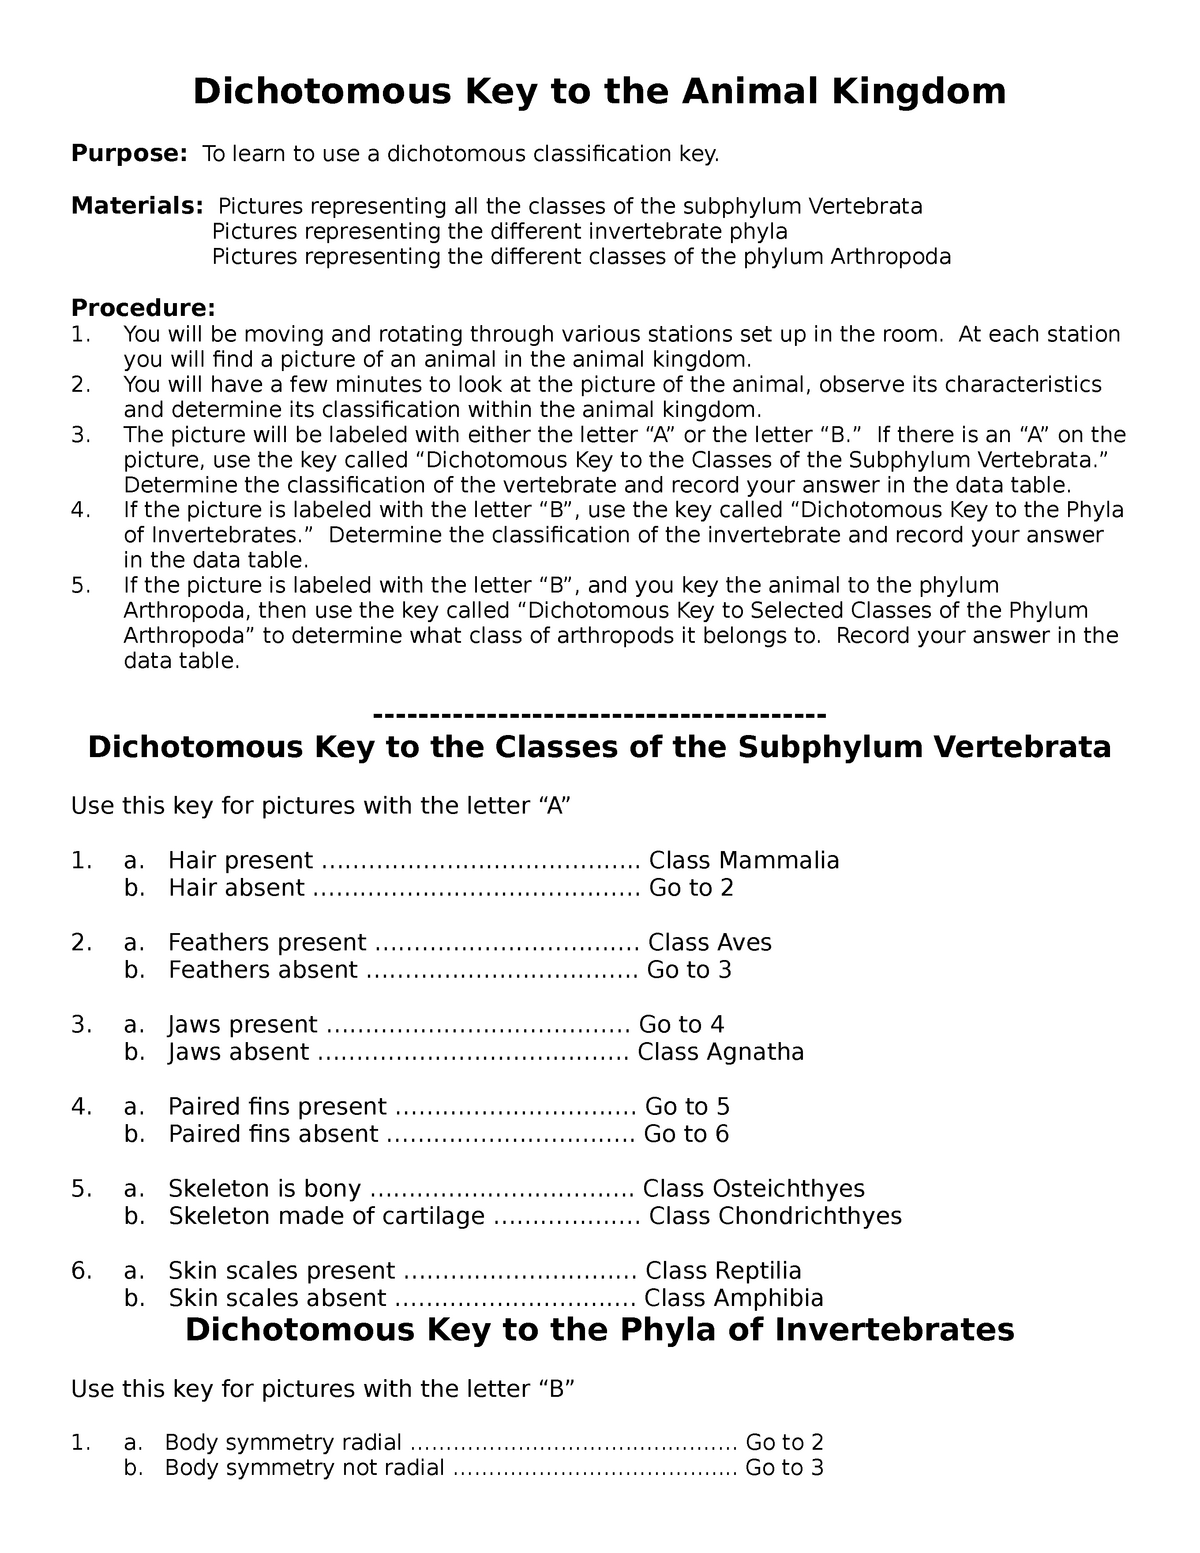 Dichotomous classification key lab - Materials: Pictures Intended For Dichotomous Key Worksheet Pdf